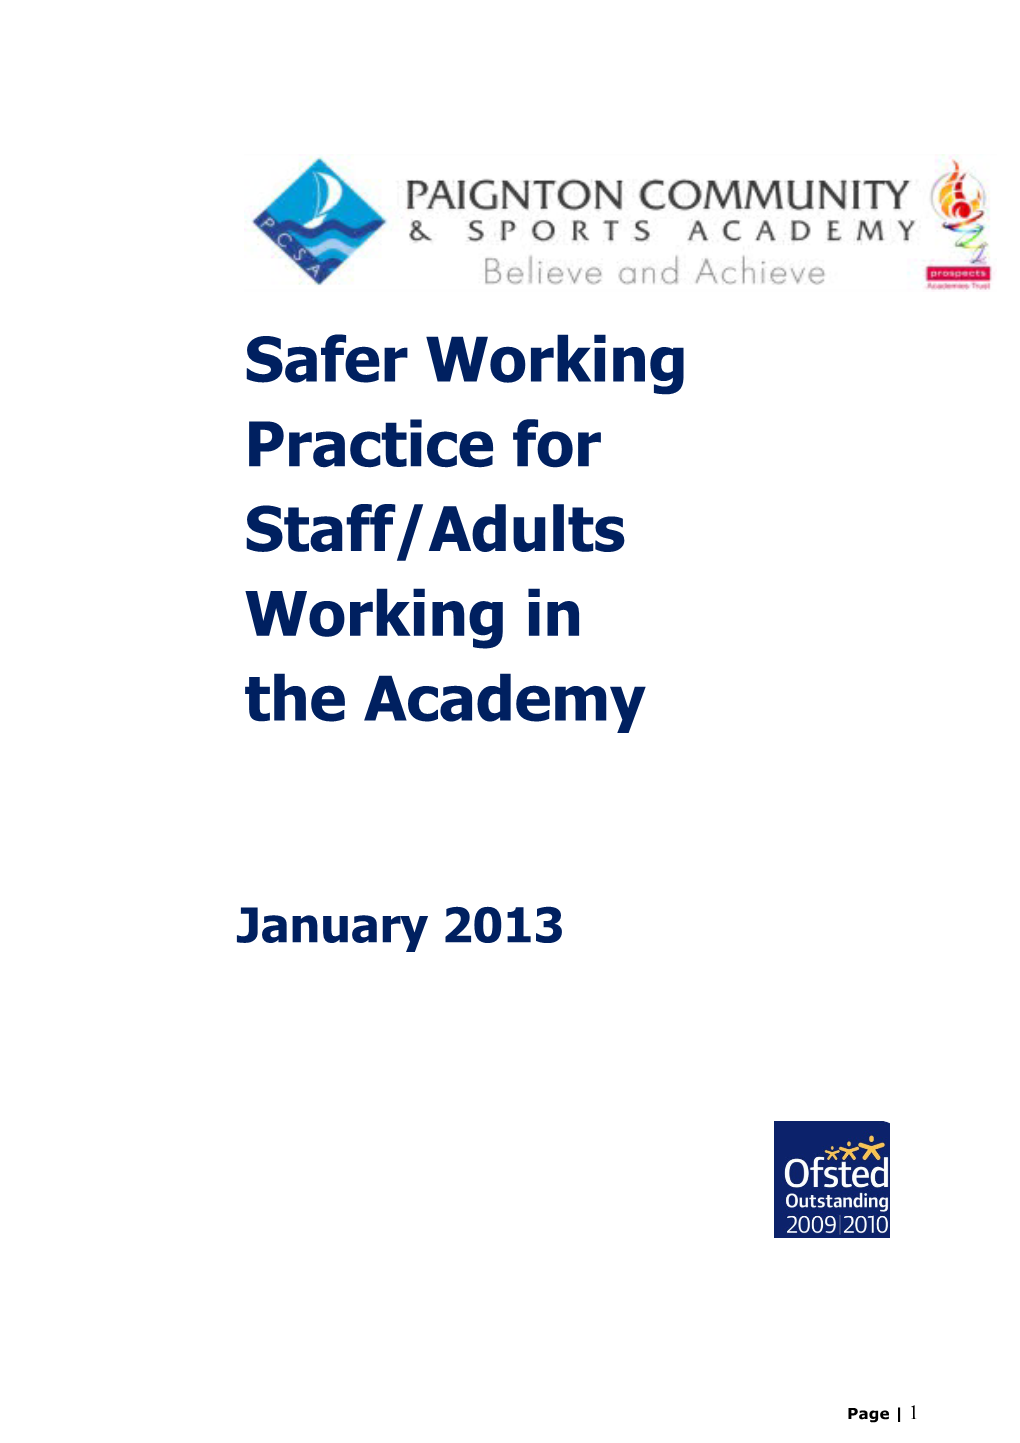 Safer Working Practice for Staff/Adults Working in the Academy